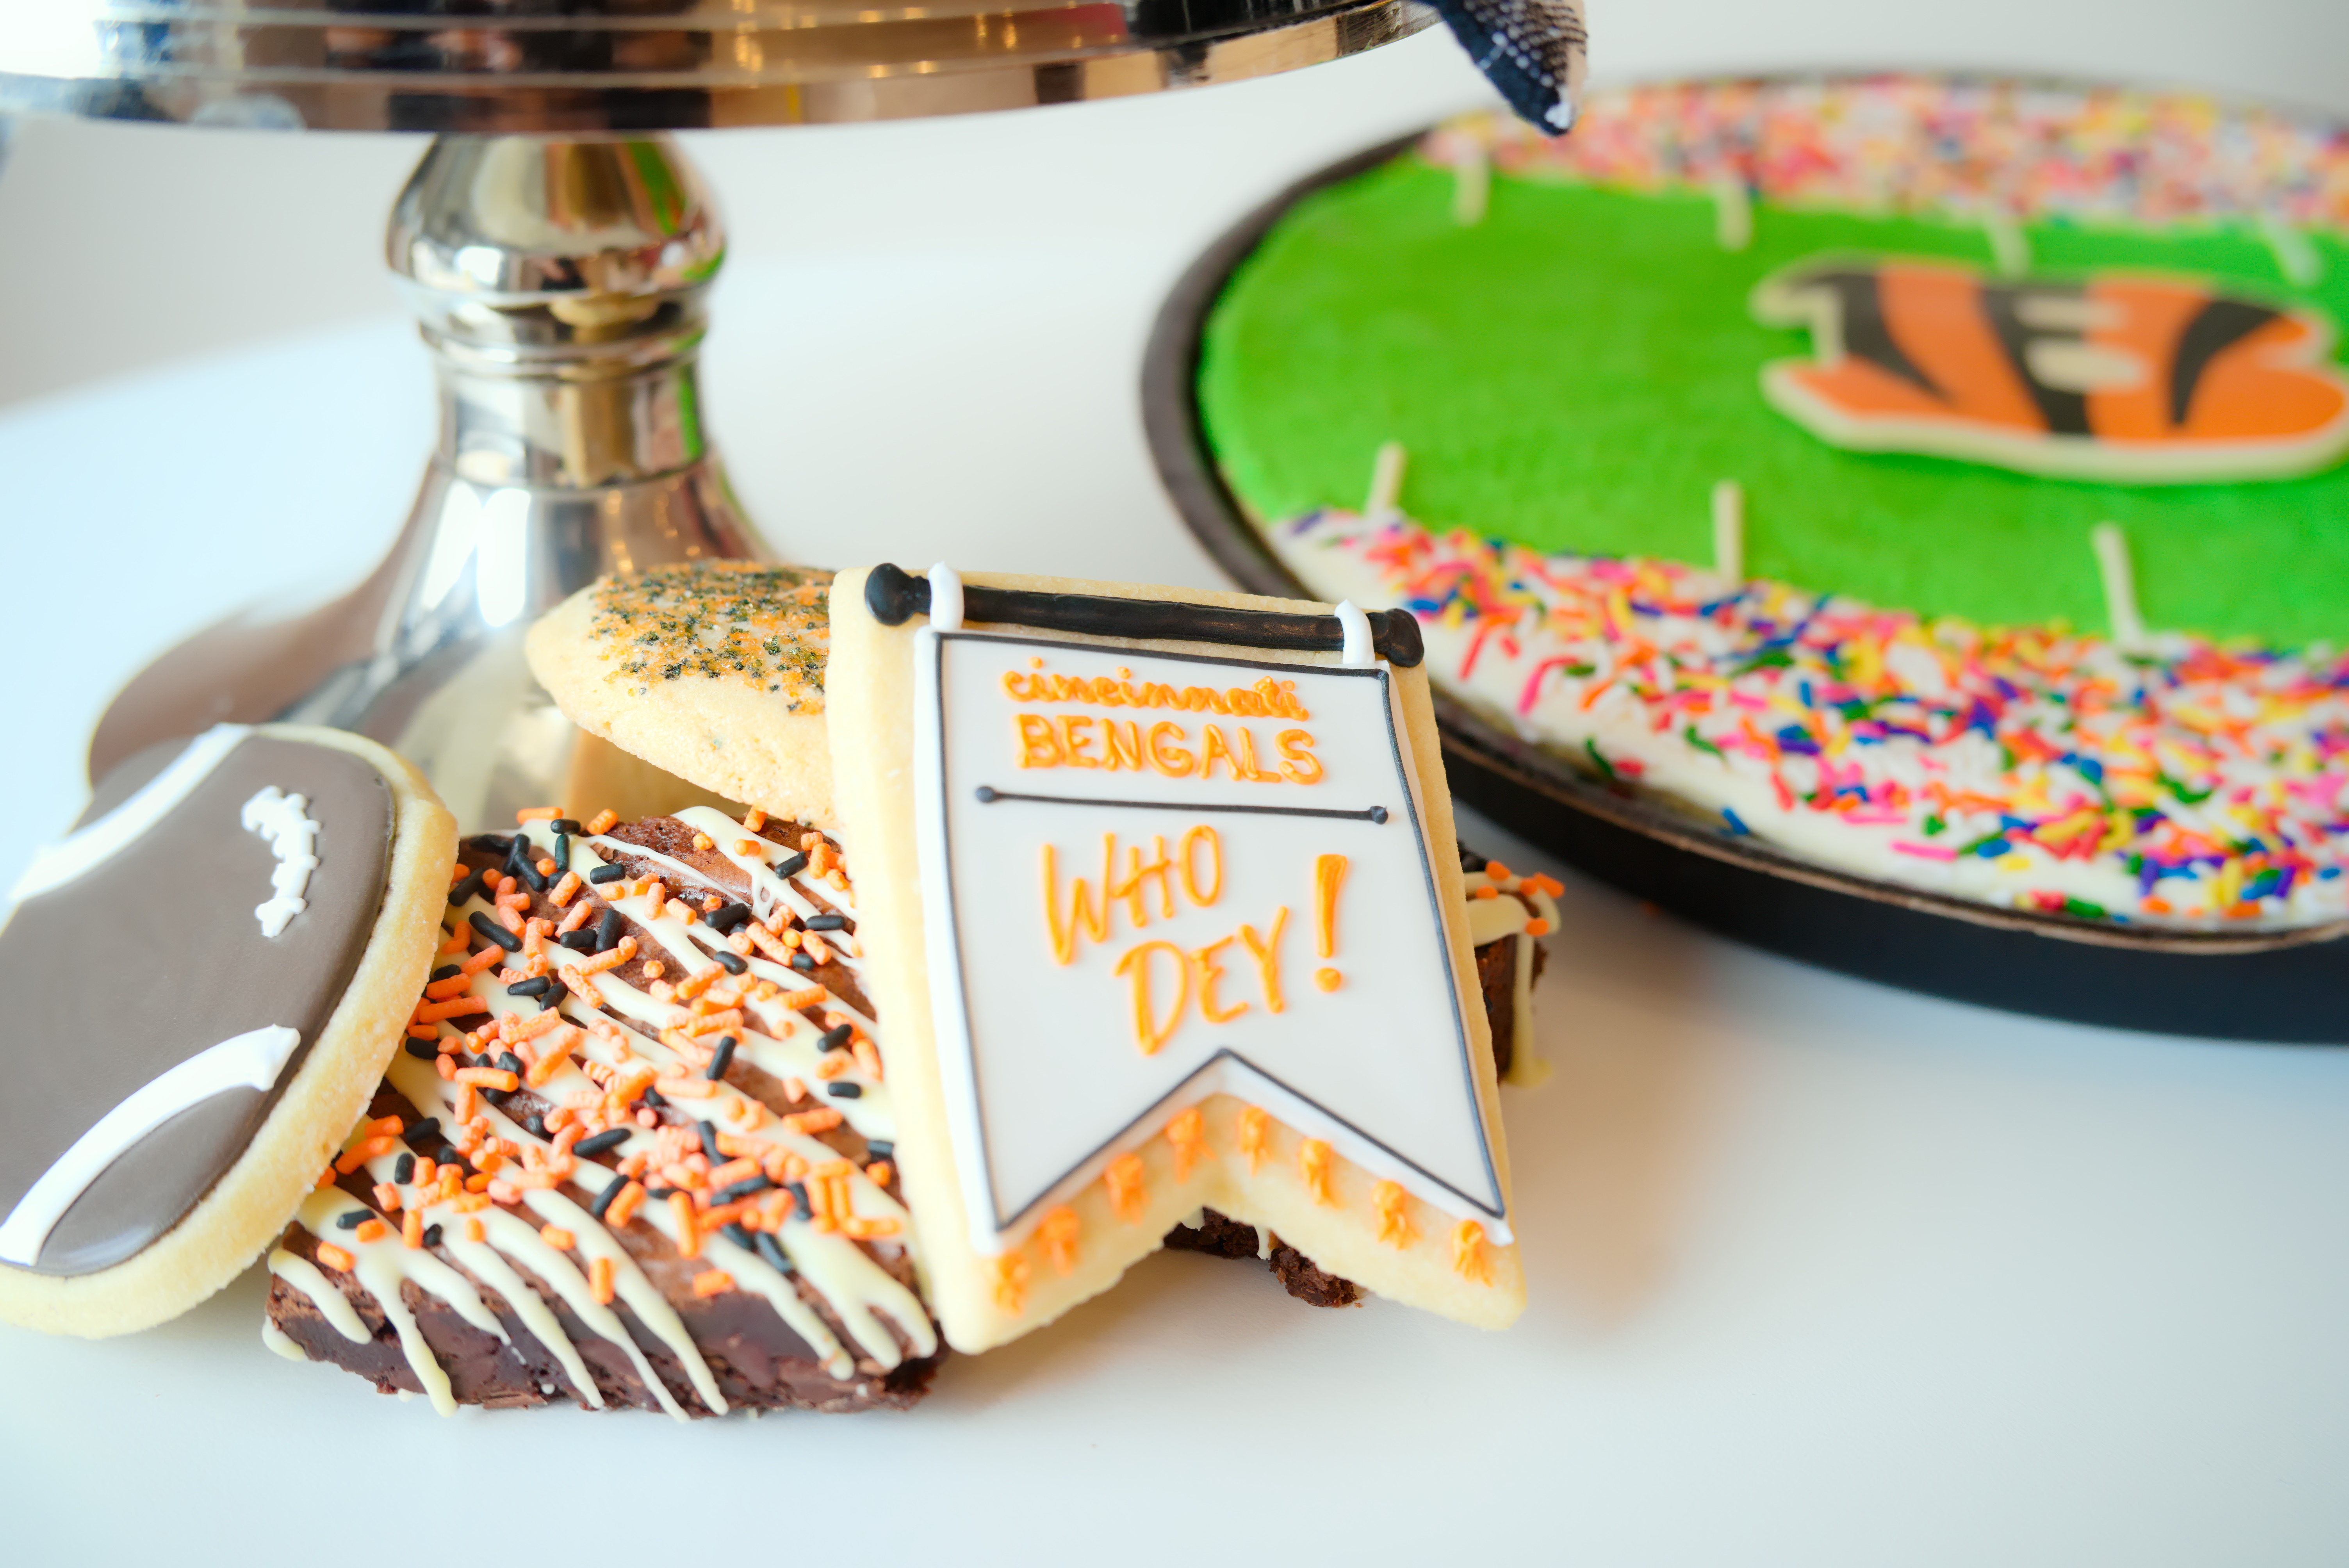 Official chili, official cookies: Cincinnati Bengals partnerships add  revenue streams for team